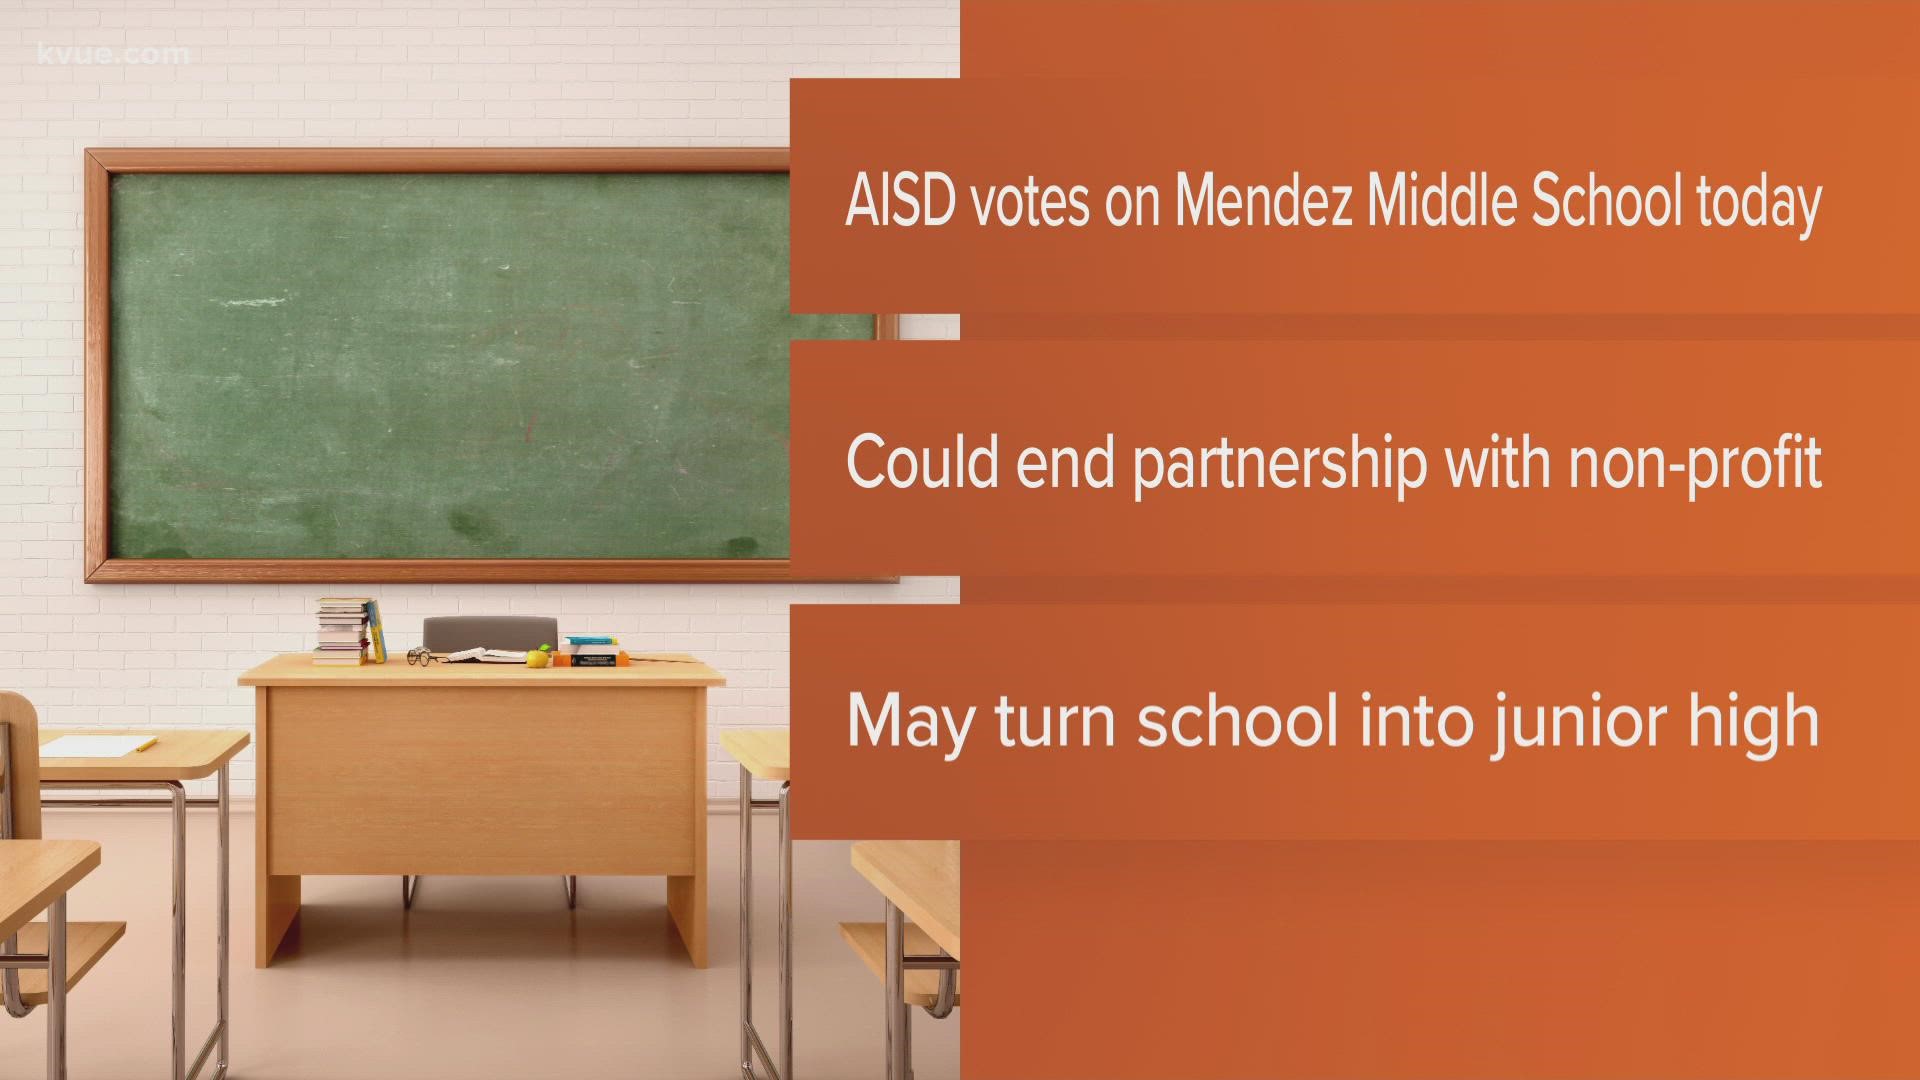 Austin ISD leaders are laying out a plan to improve Mendez Middle School.